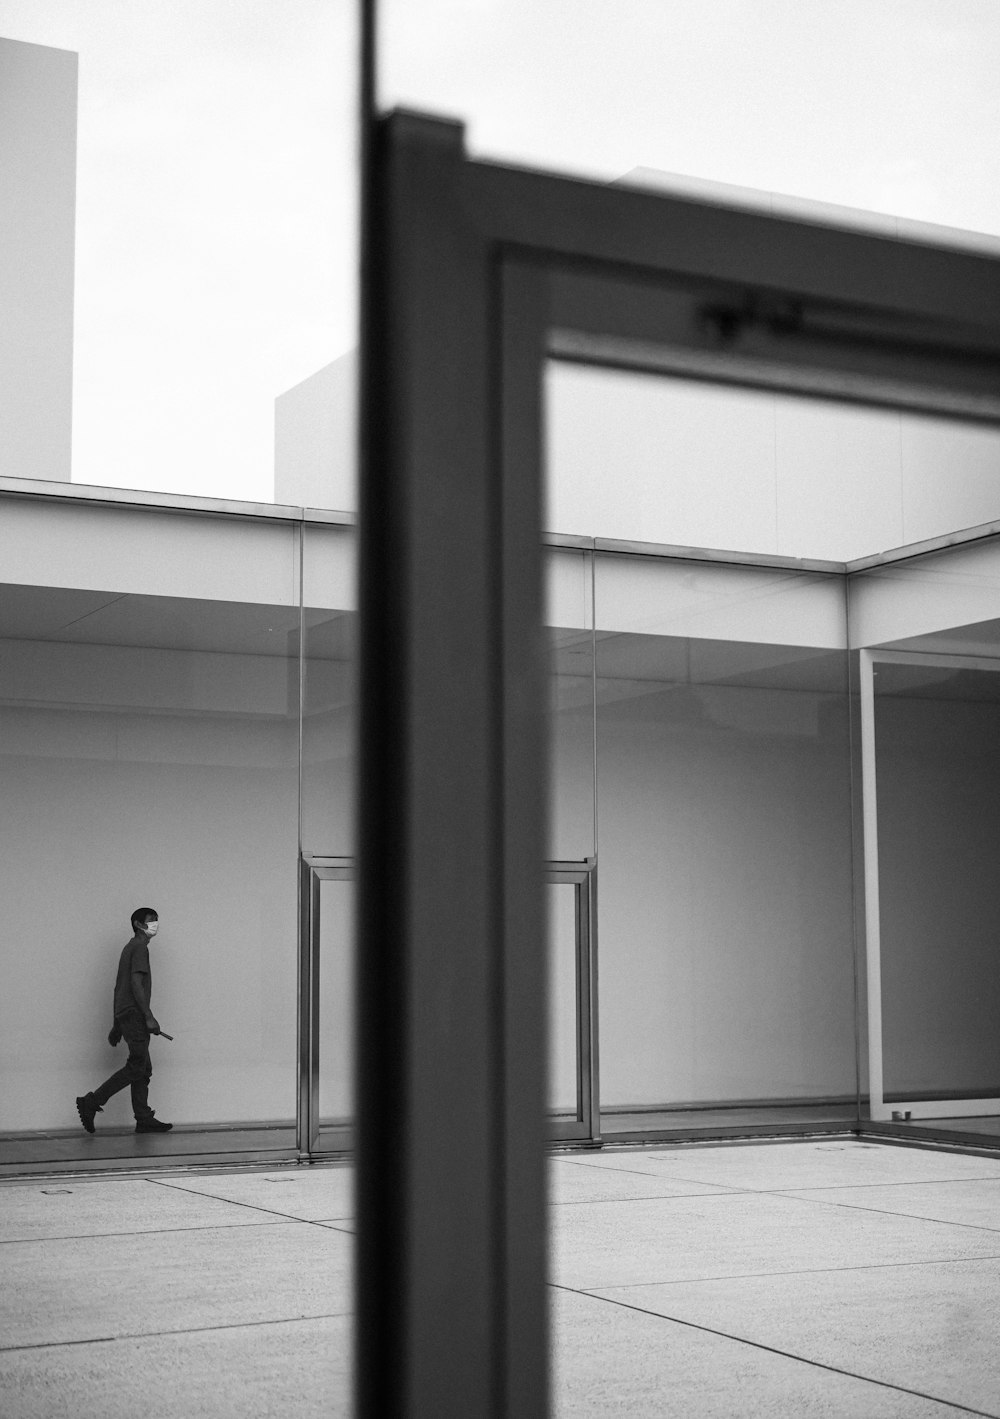 a person walking in a building